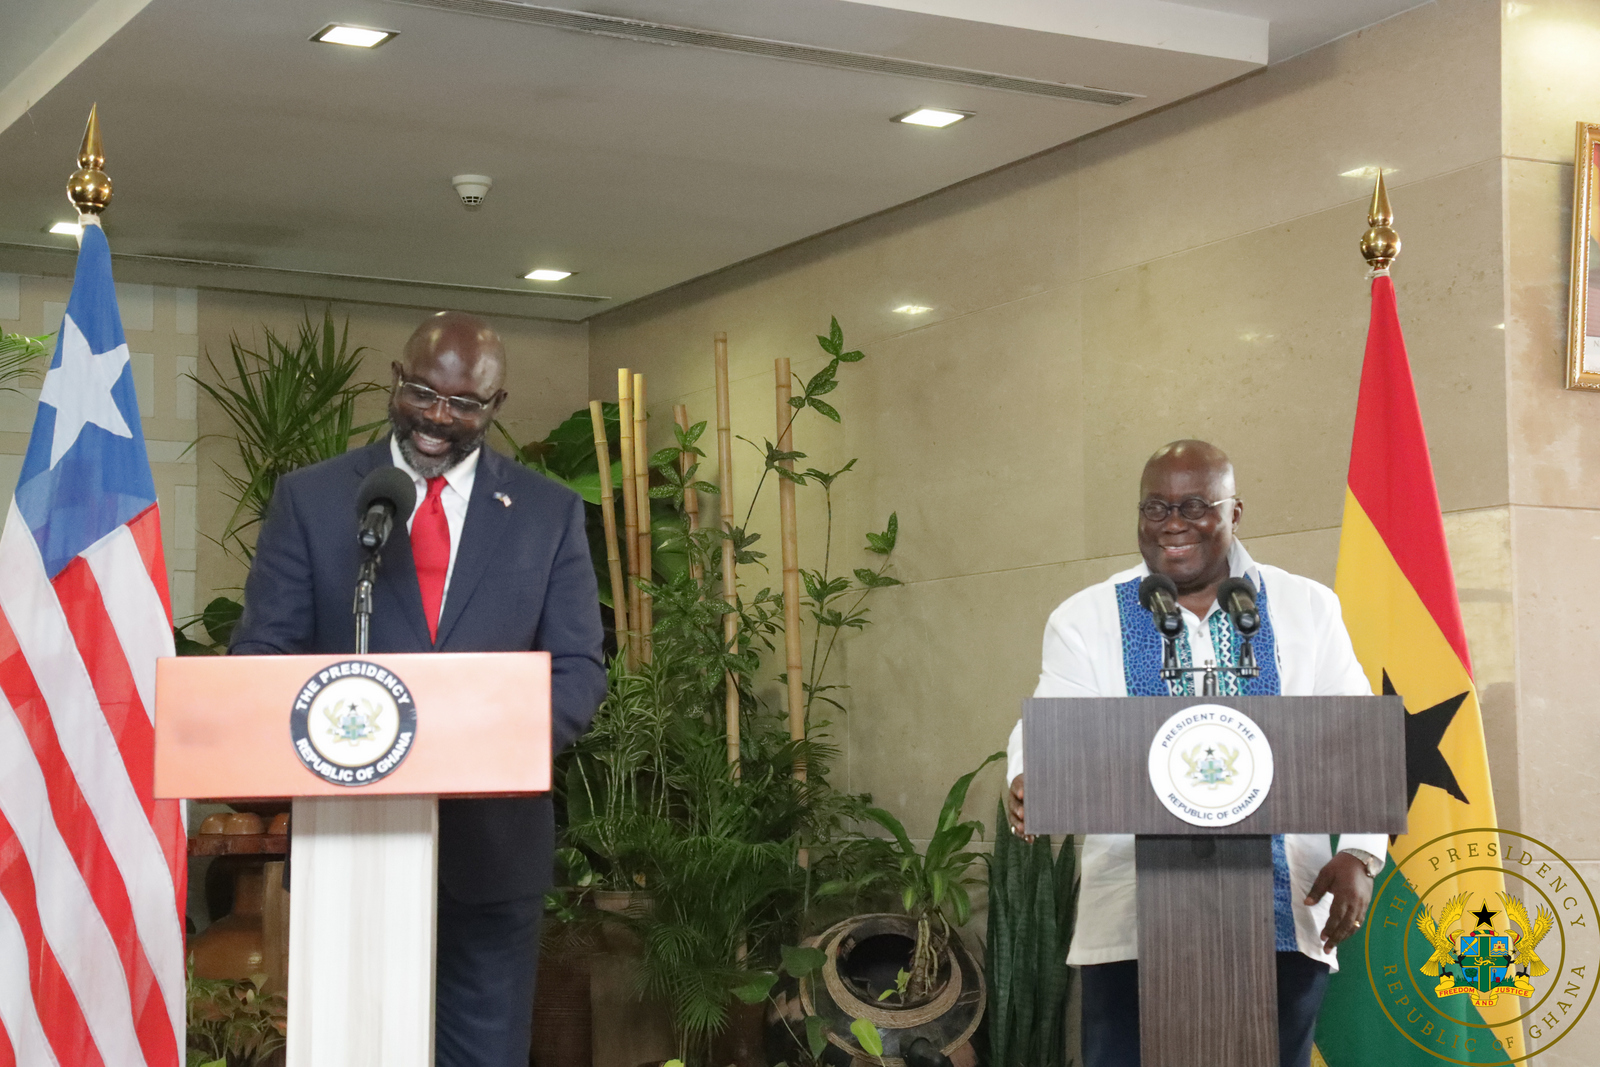 President Akufo-Addo and President Weah address a joint press conference at the Jubilee House